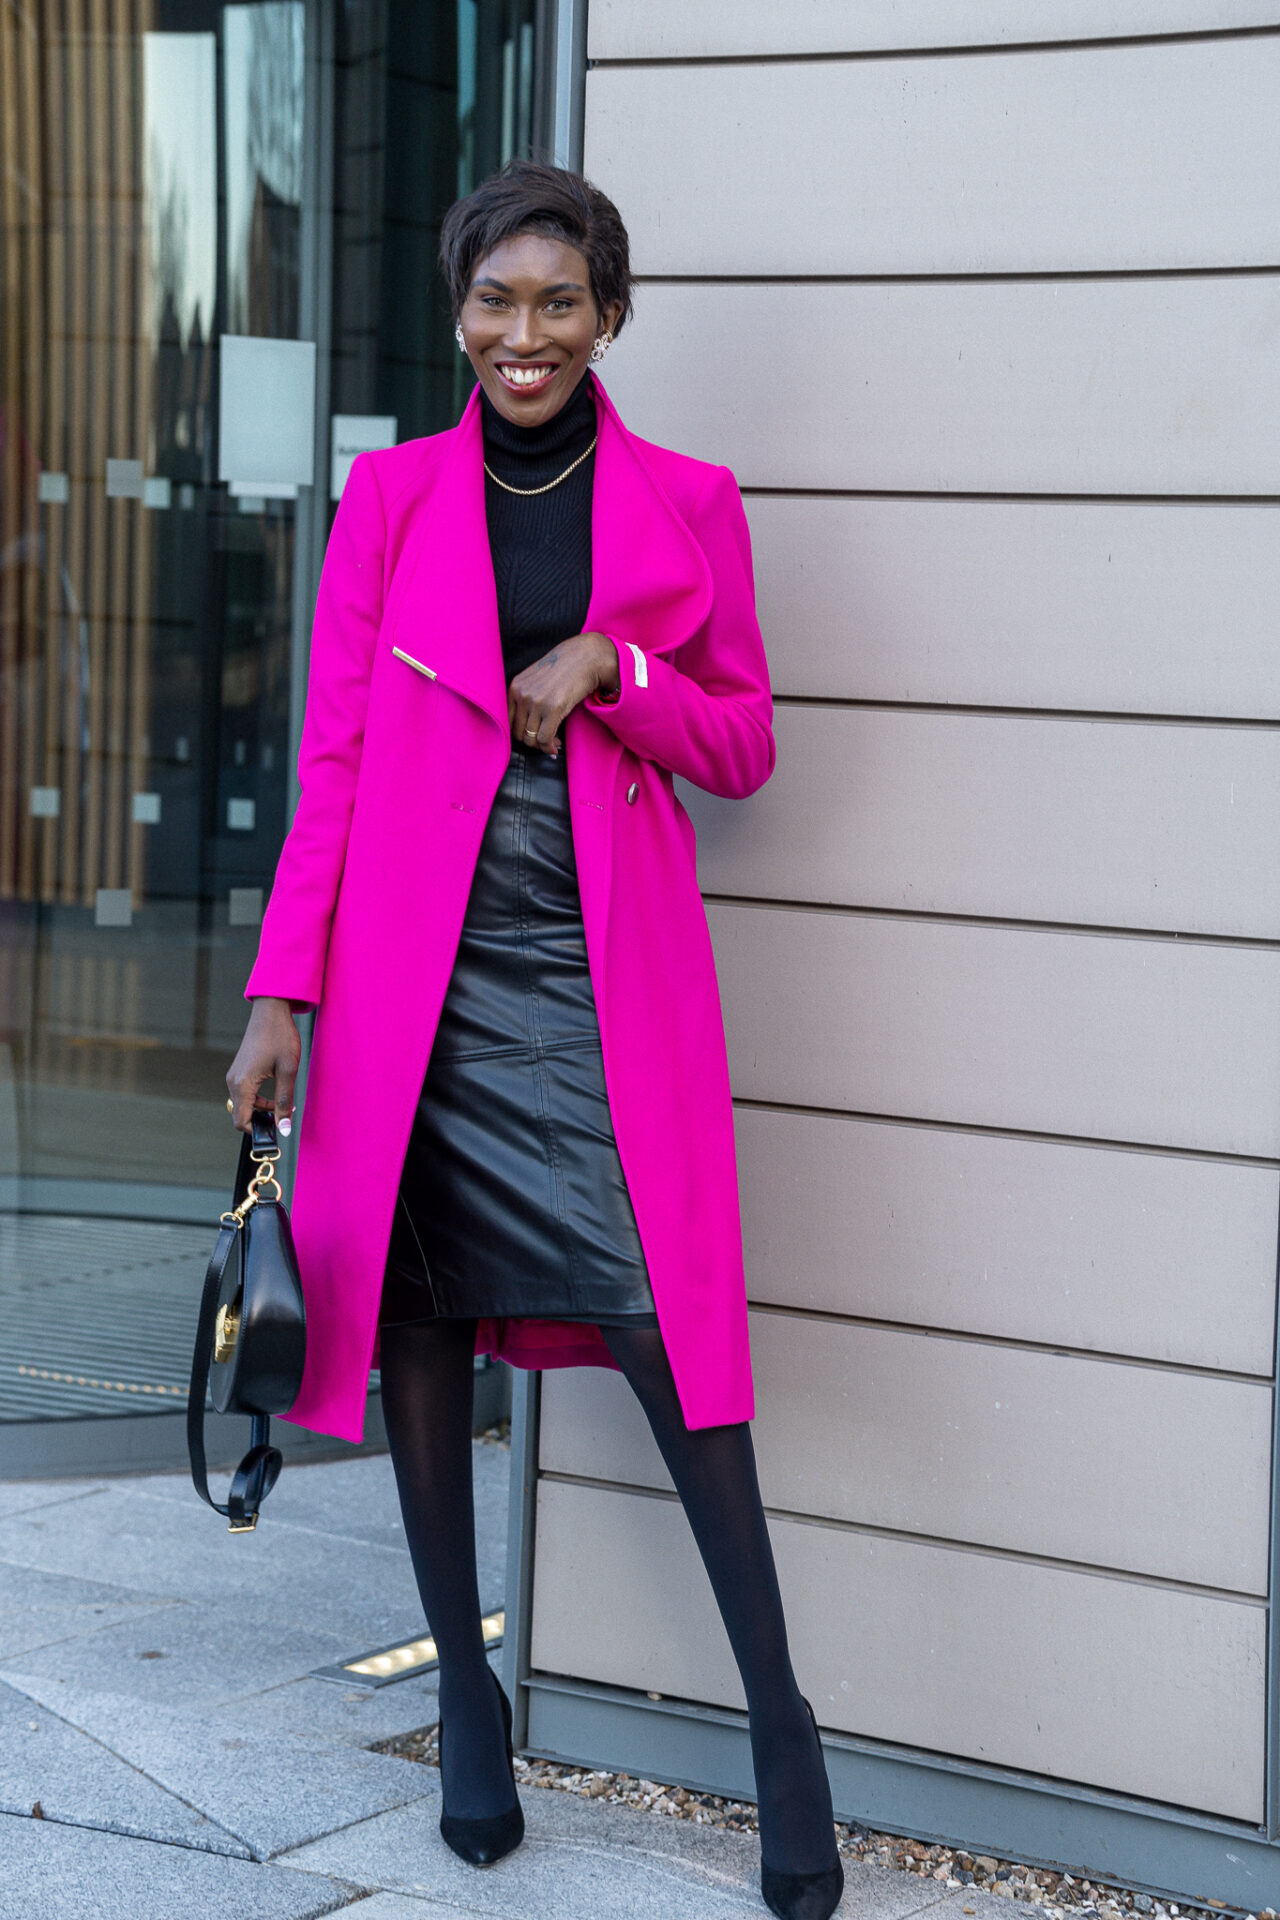 The Most Stylish coat - Ted Baker Coat Review - Thatcorporatechic